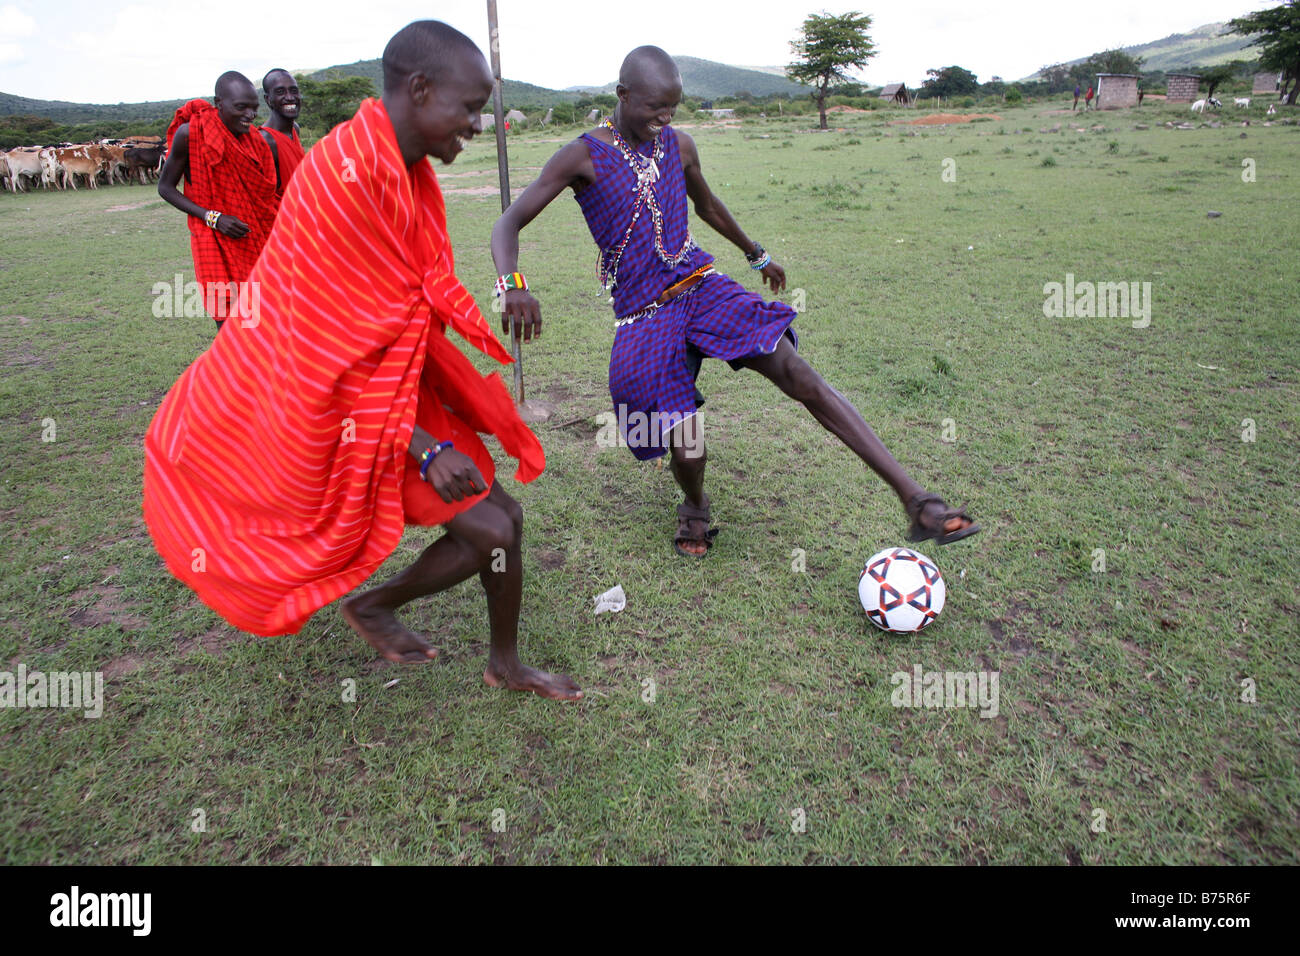 Football is opne of the most popular activities among the Massai tribe in south kenya Whenever their cows are brought in the vil Stock Photo